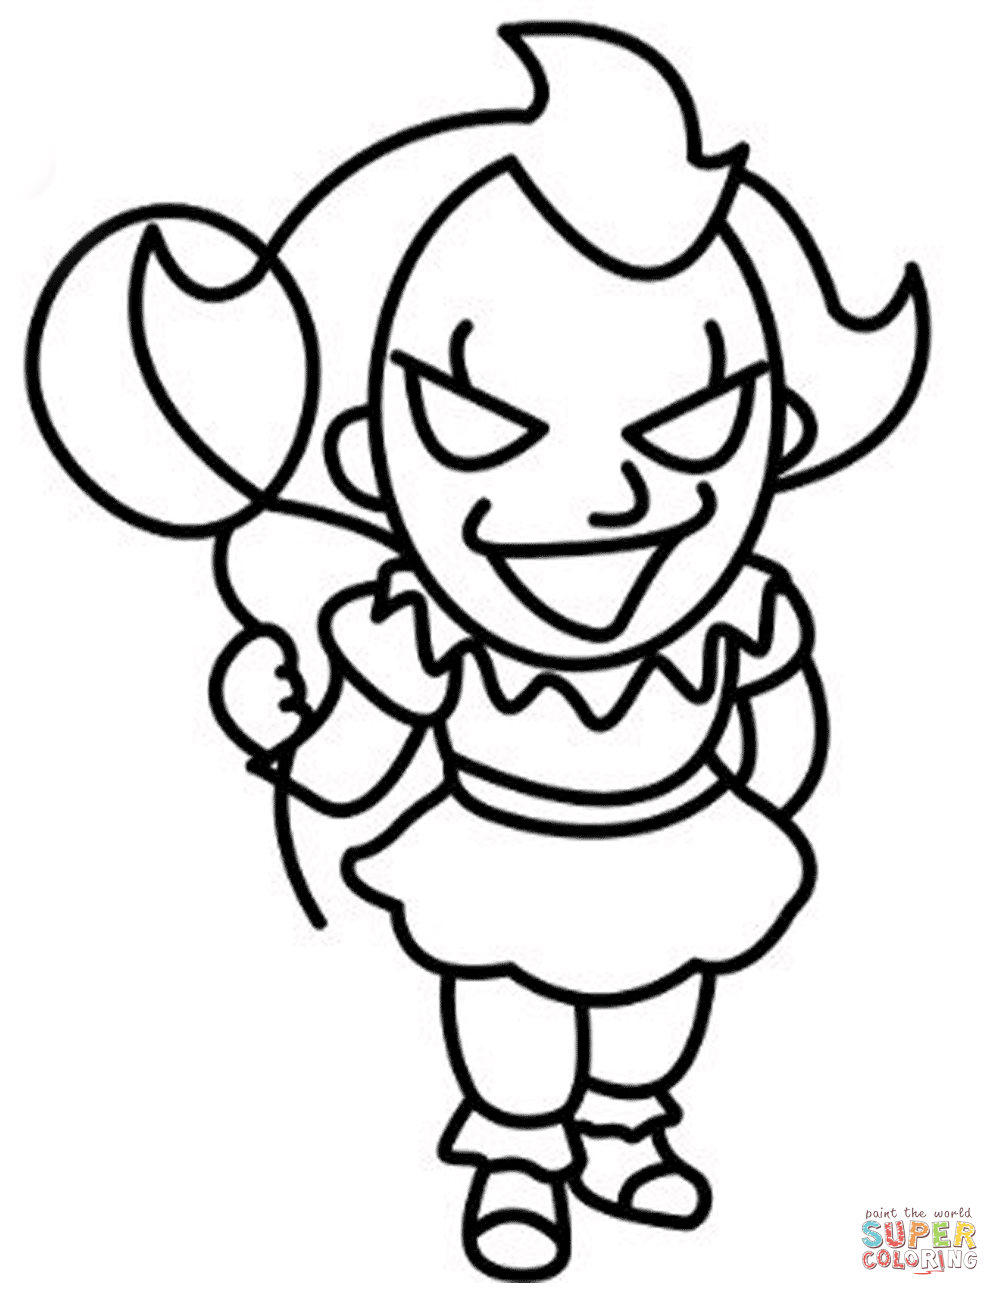 Chibi evil clown pennywise coloring page free printable coloring pages